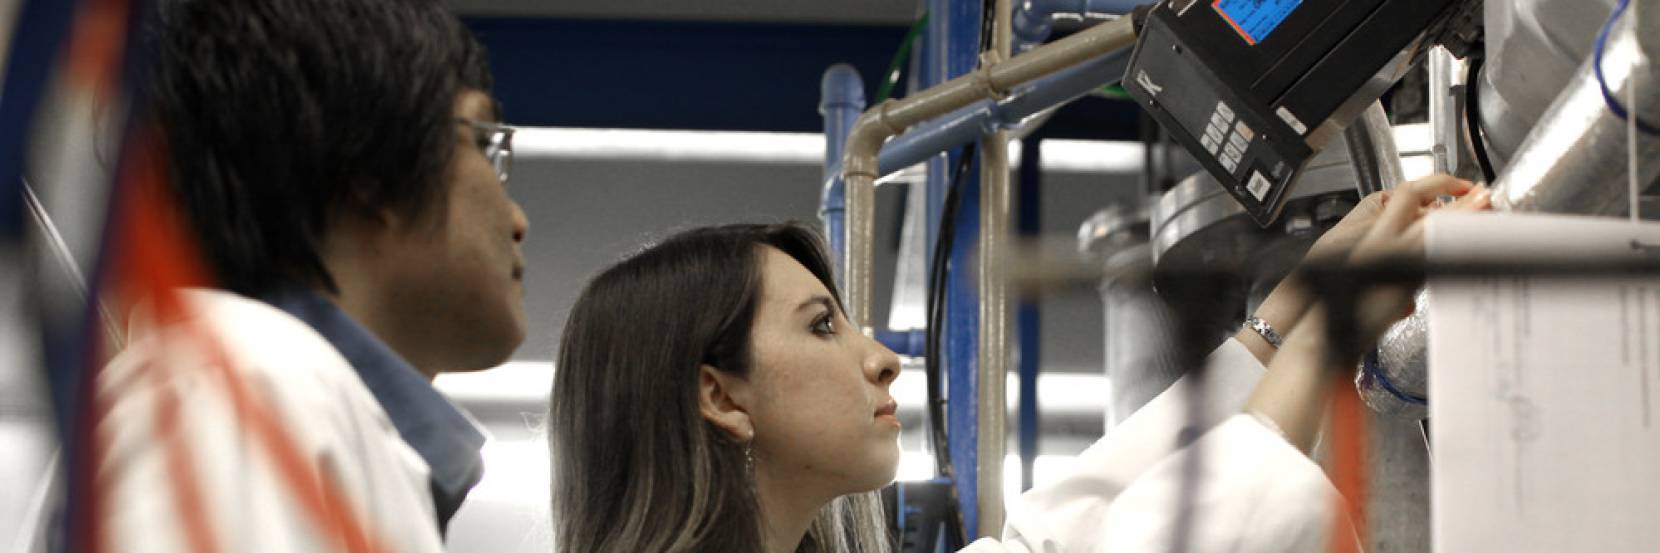 An image of two students working together in a lab